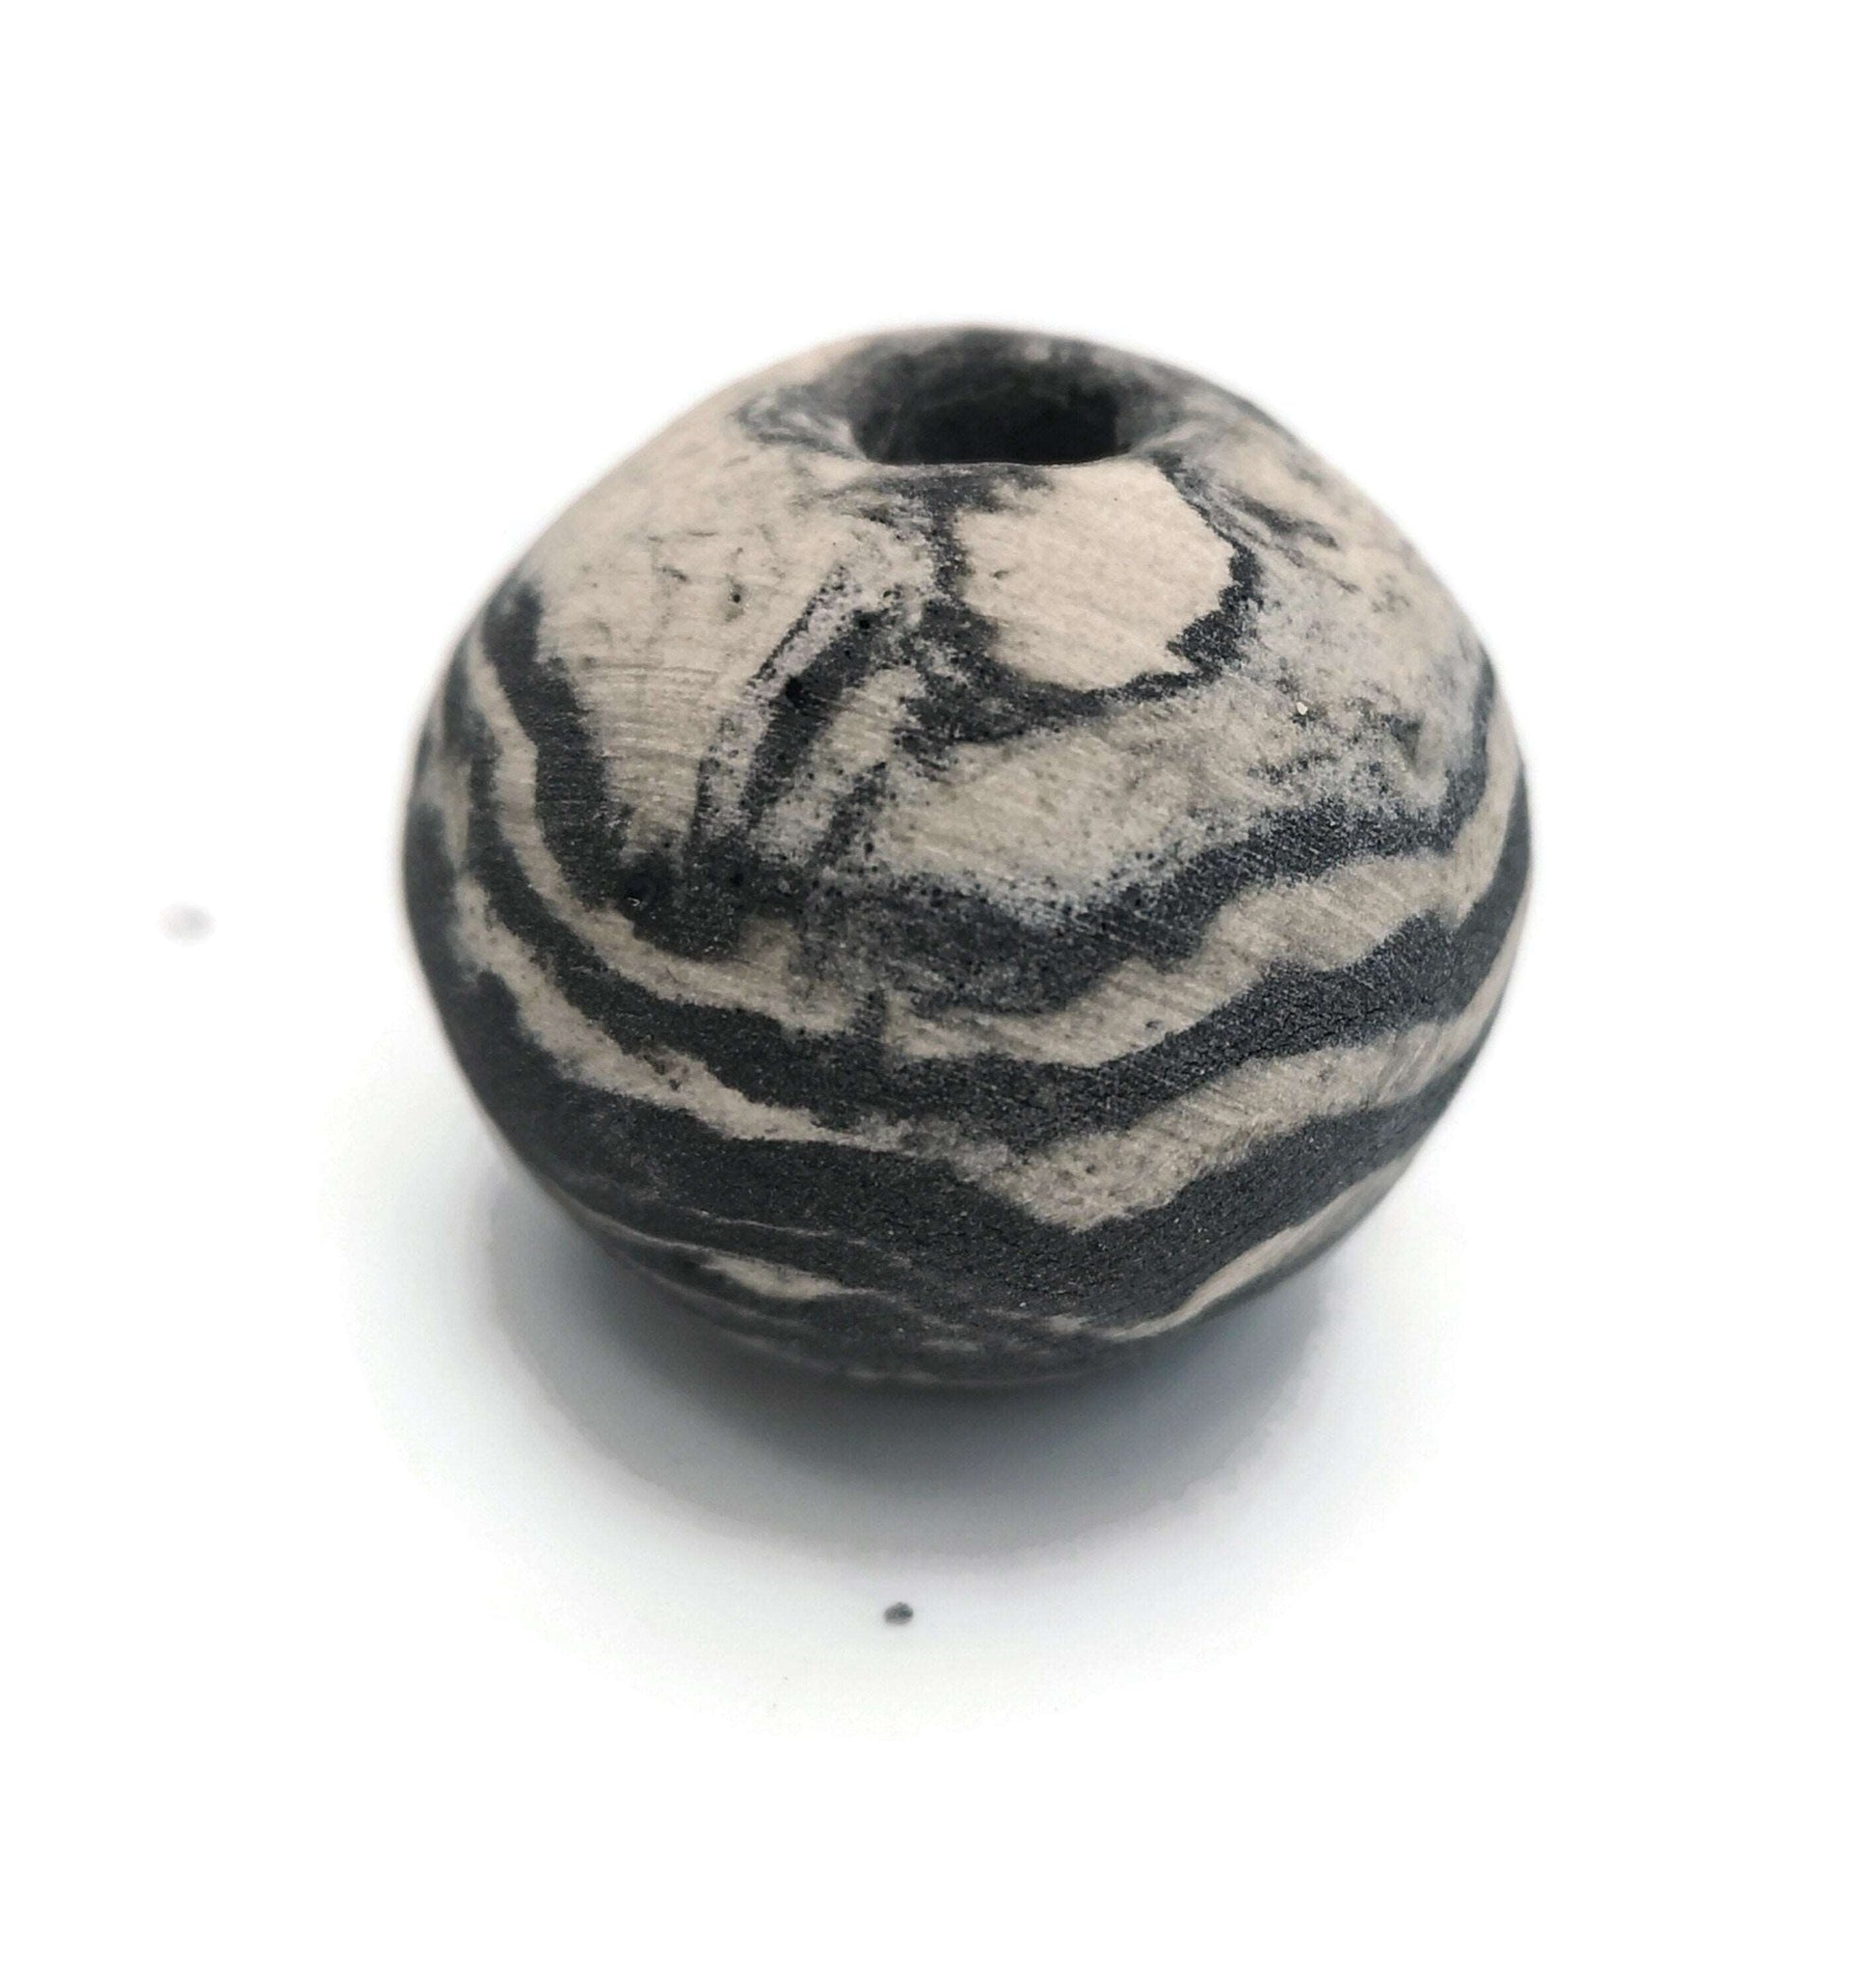 1Pc 30mm Handmade Ceramic Macrame Beads Large Hole, Extra Large Marbled Black And White Jewelry Making Supplies, Artisan Beads